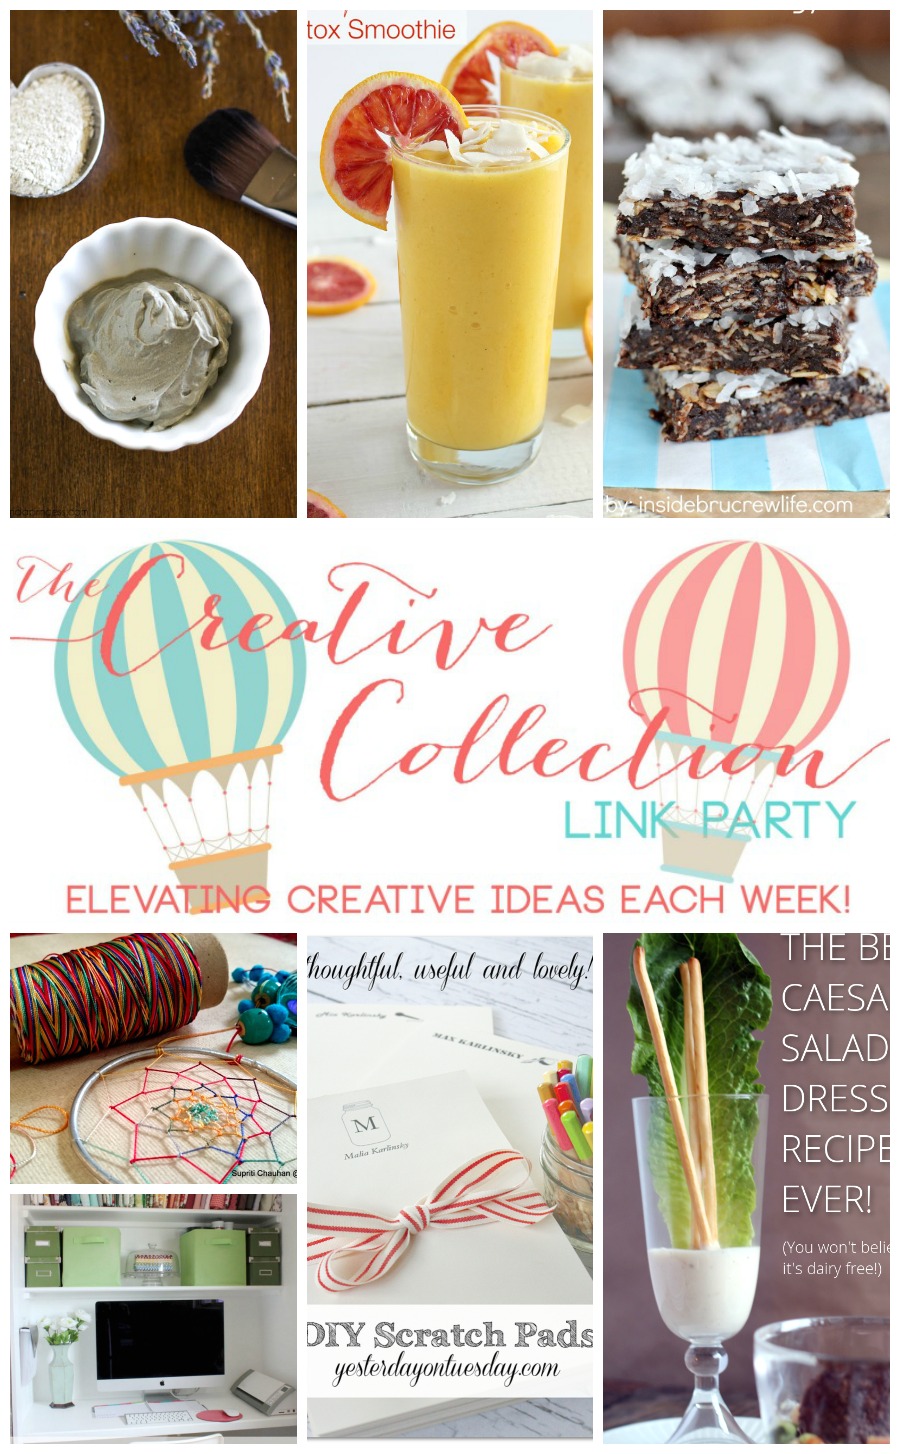 The Creative Collection Link Party